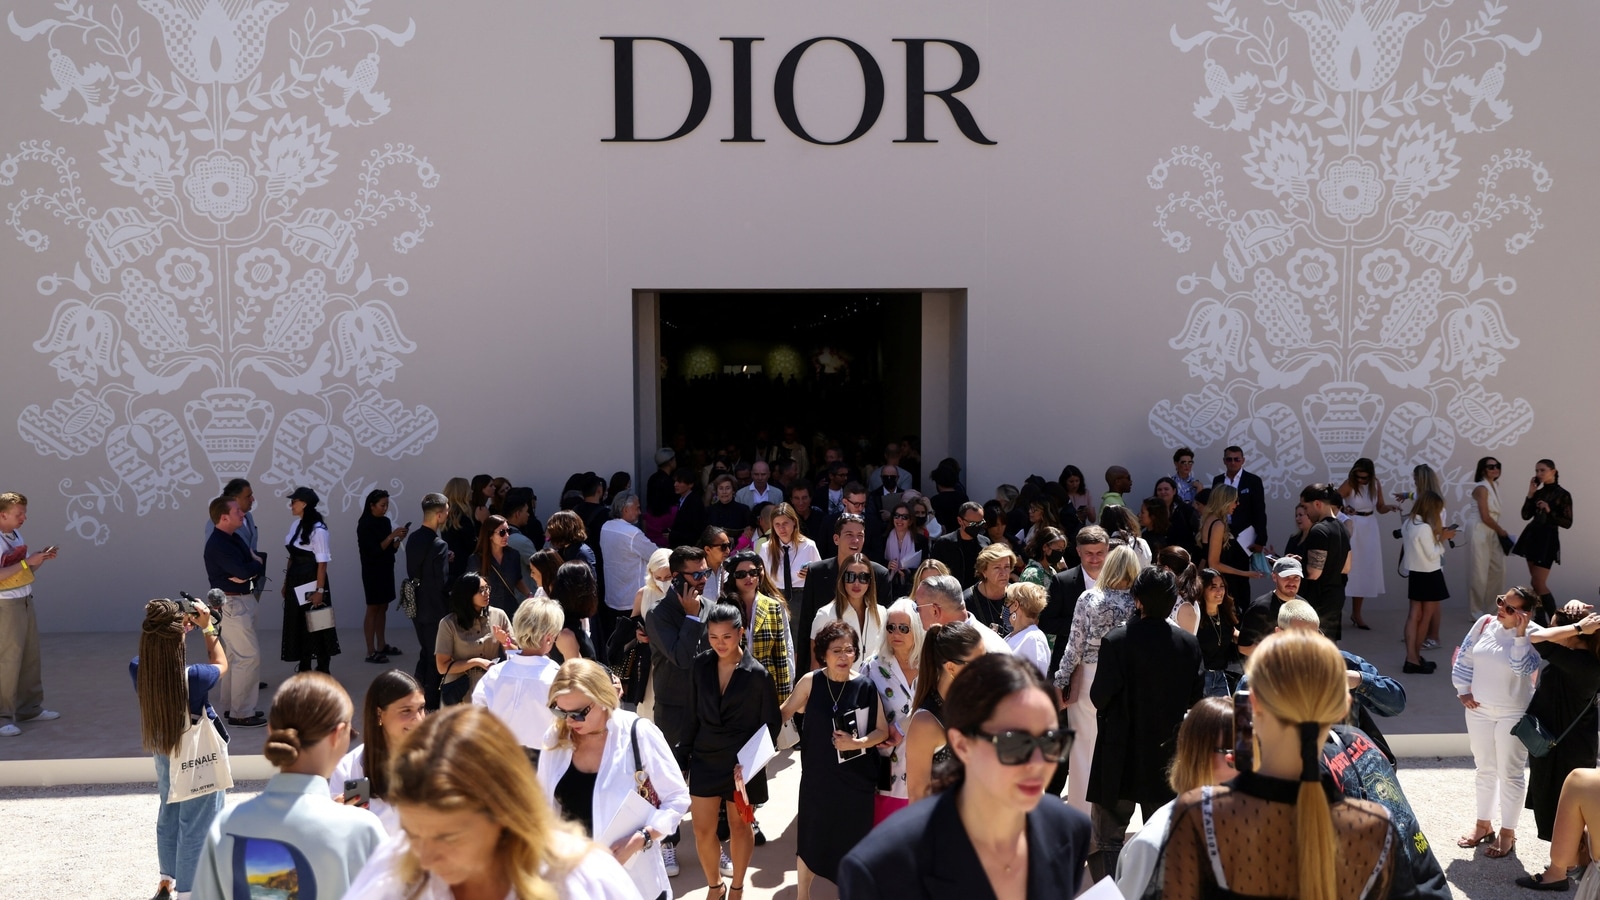 What I Wore to the Dior Fashion Show